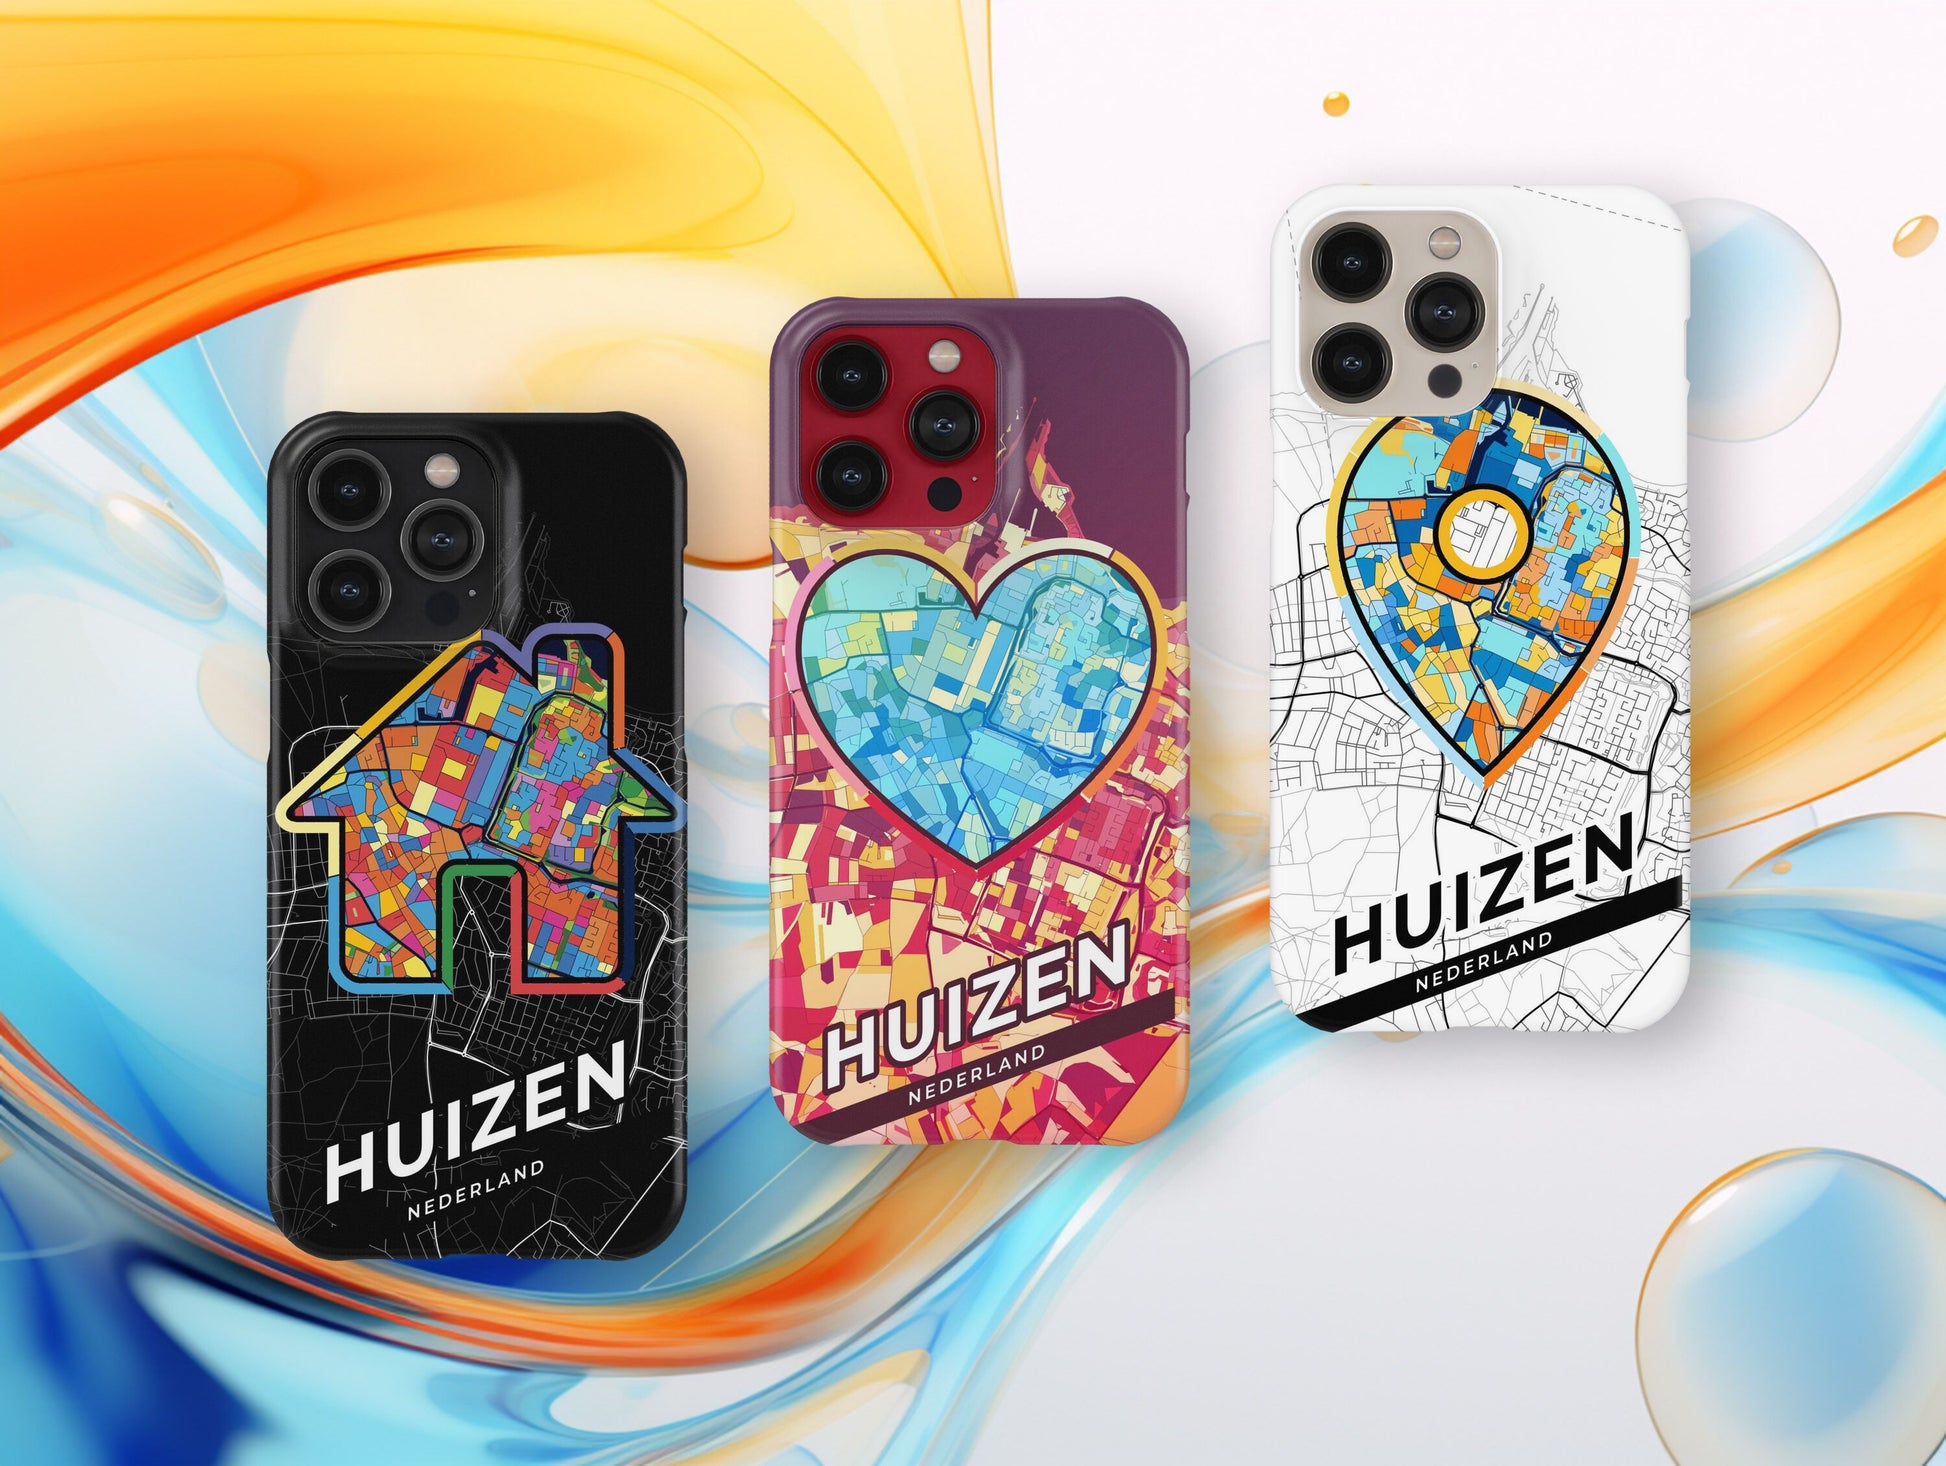 Huizen Netherlands slim phone case with colorful icon. Birthday, wedding or housewarming gift. Couple match cases.